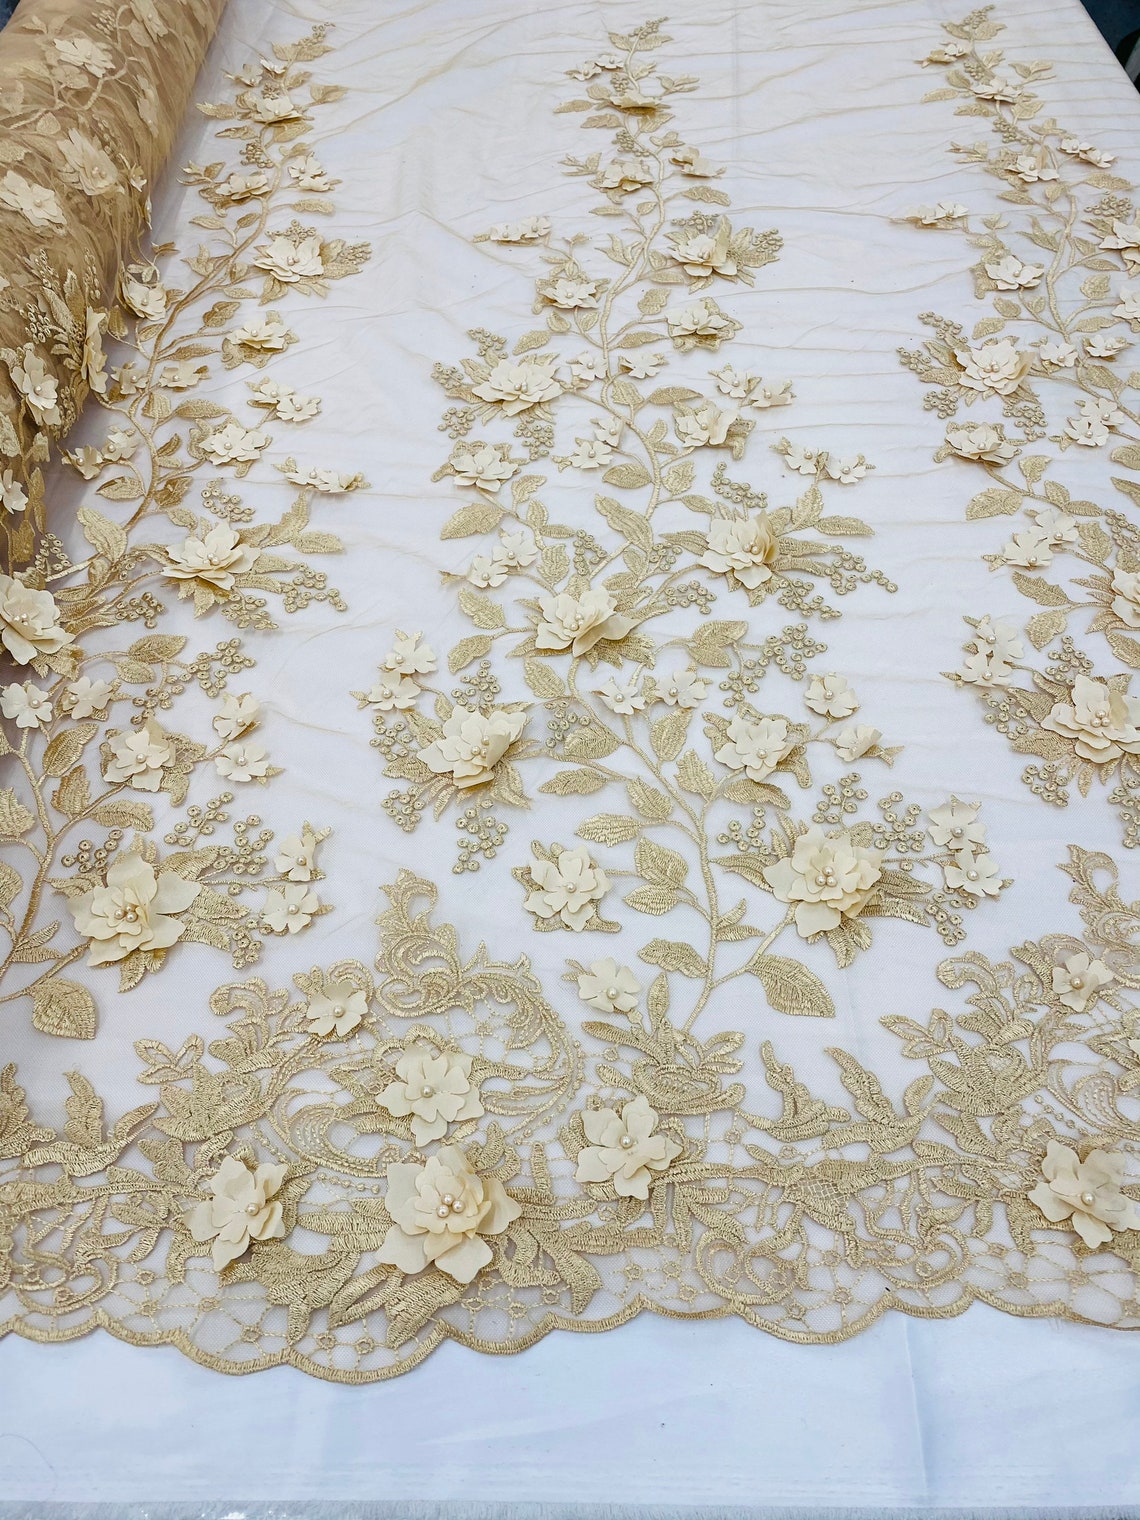 3D Floral Princess Fabric - Champagne - Embroidered Floral Lace Fabric with 3D Flowers By Yard